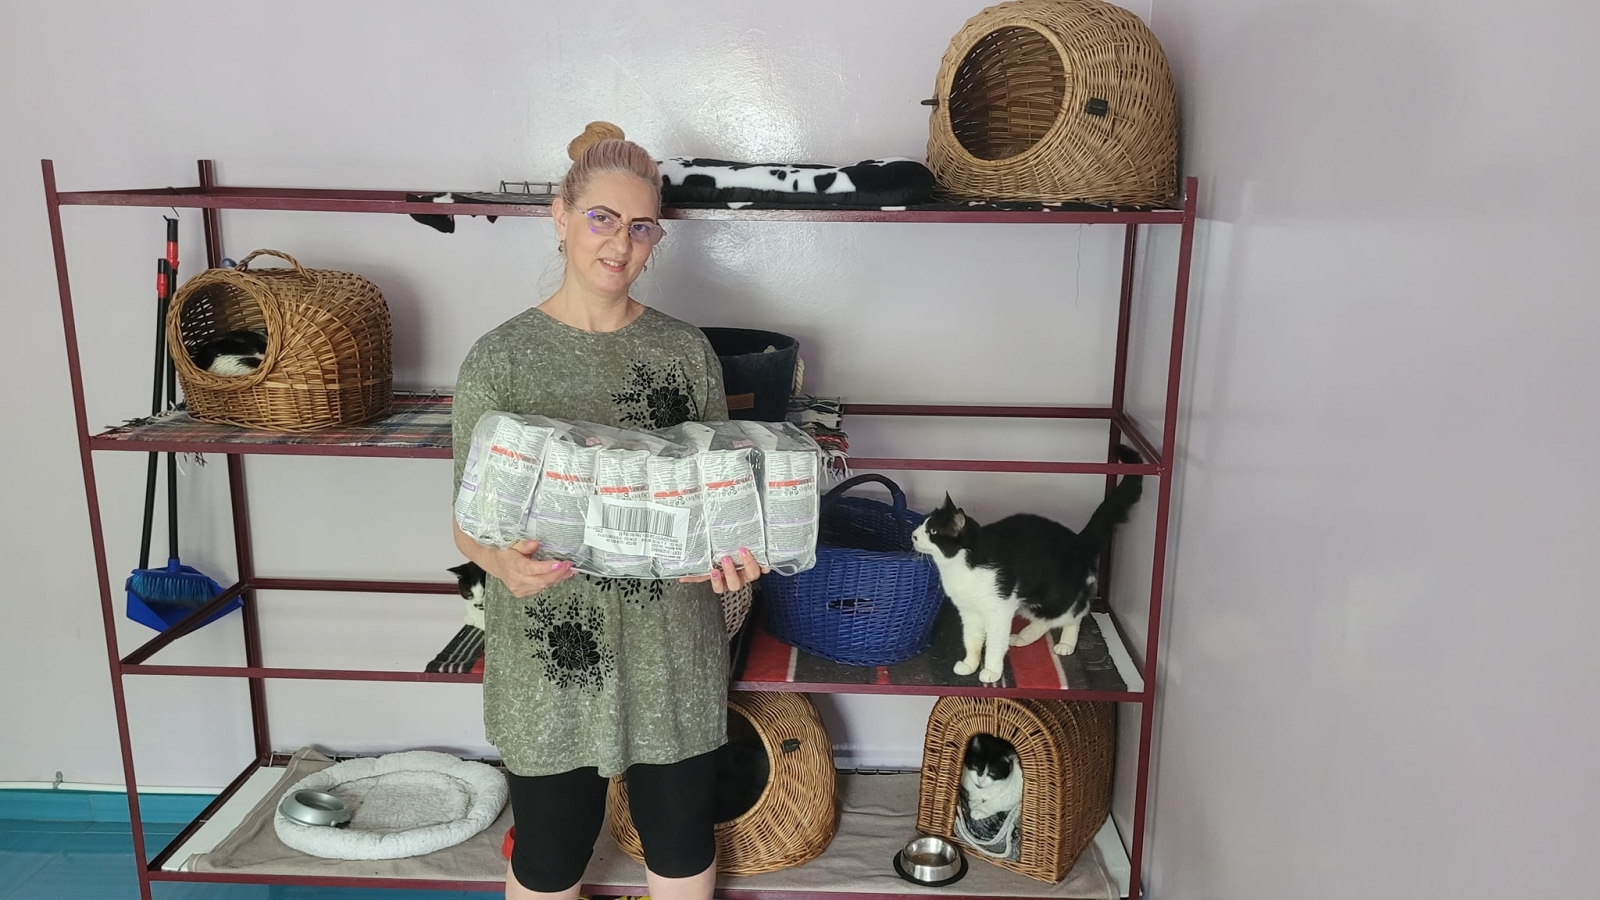 We donated cat-food to the local shelter